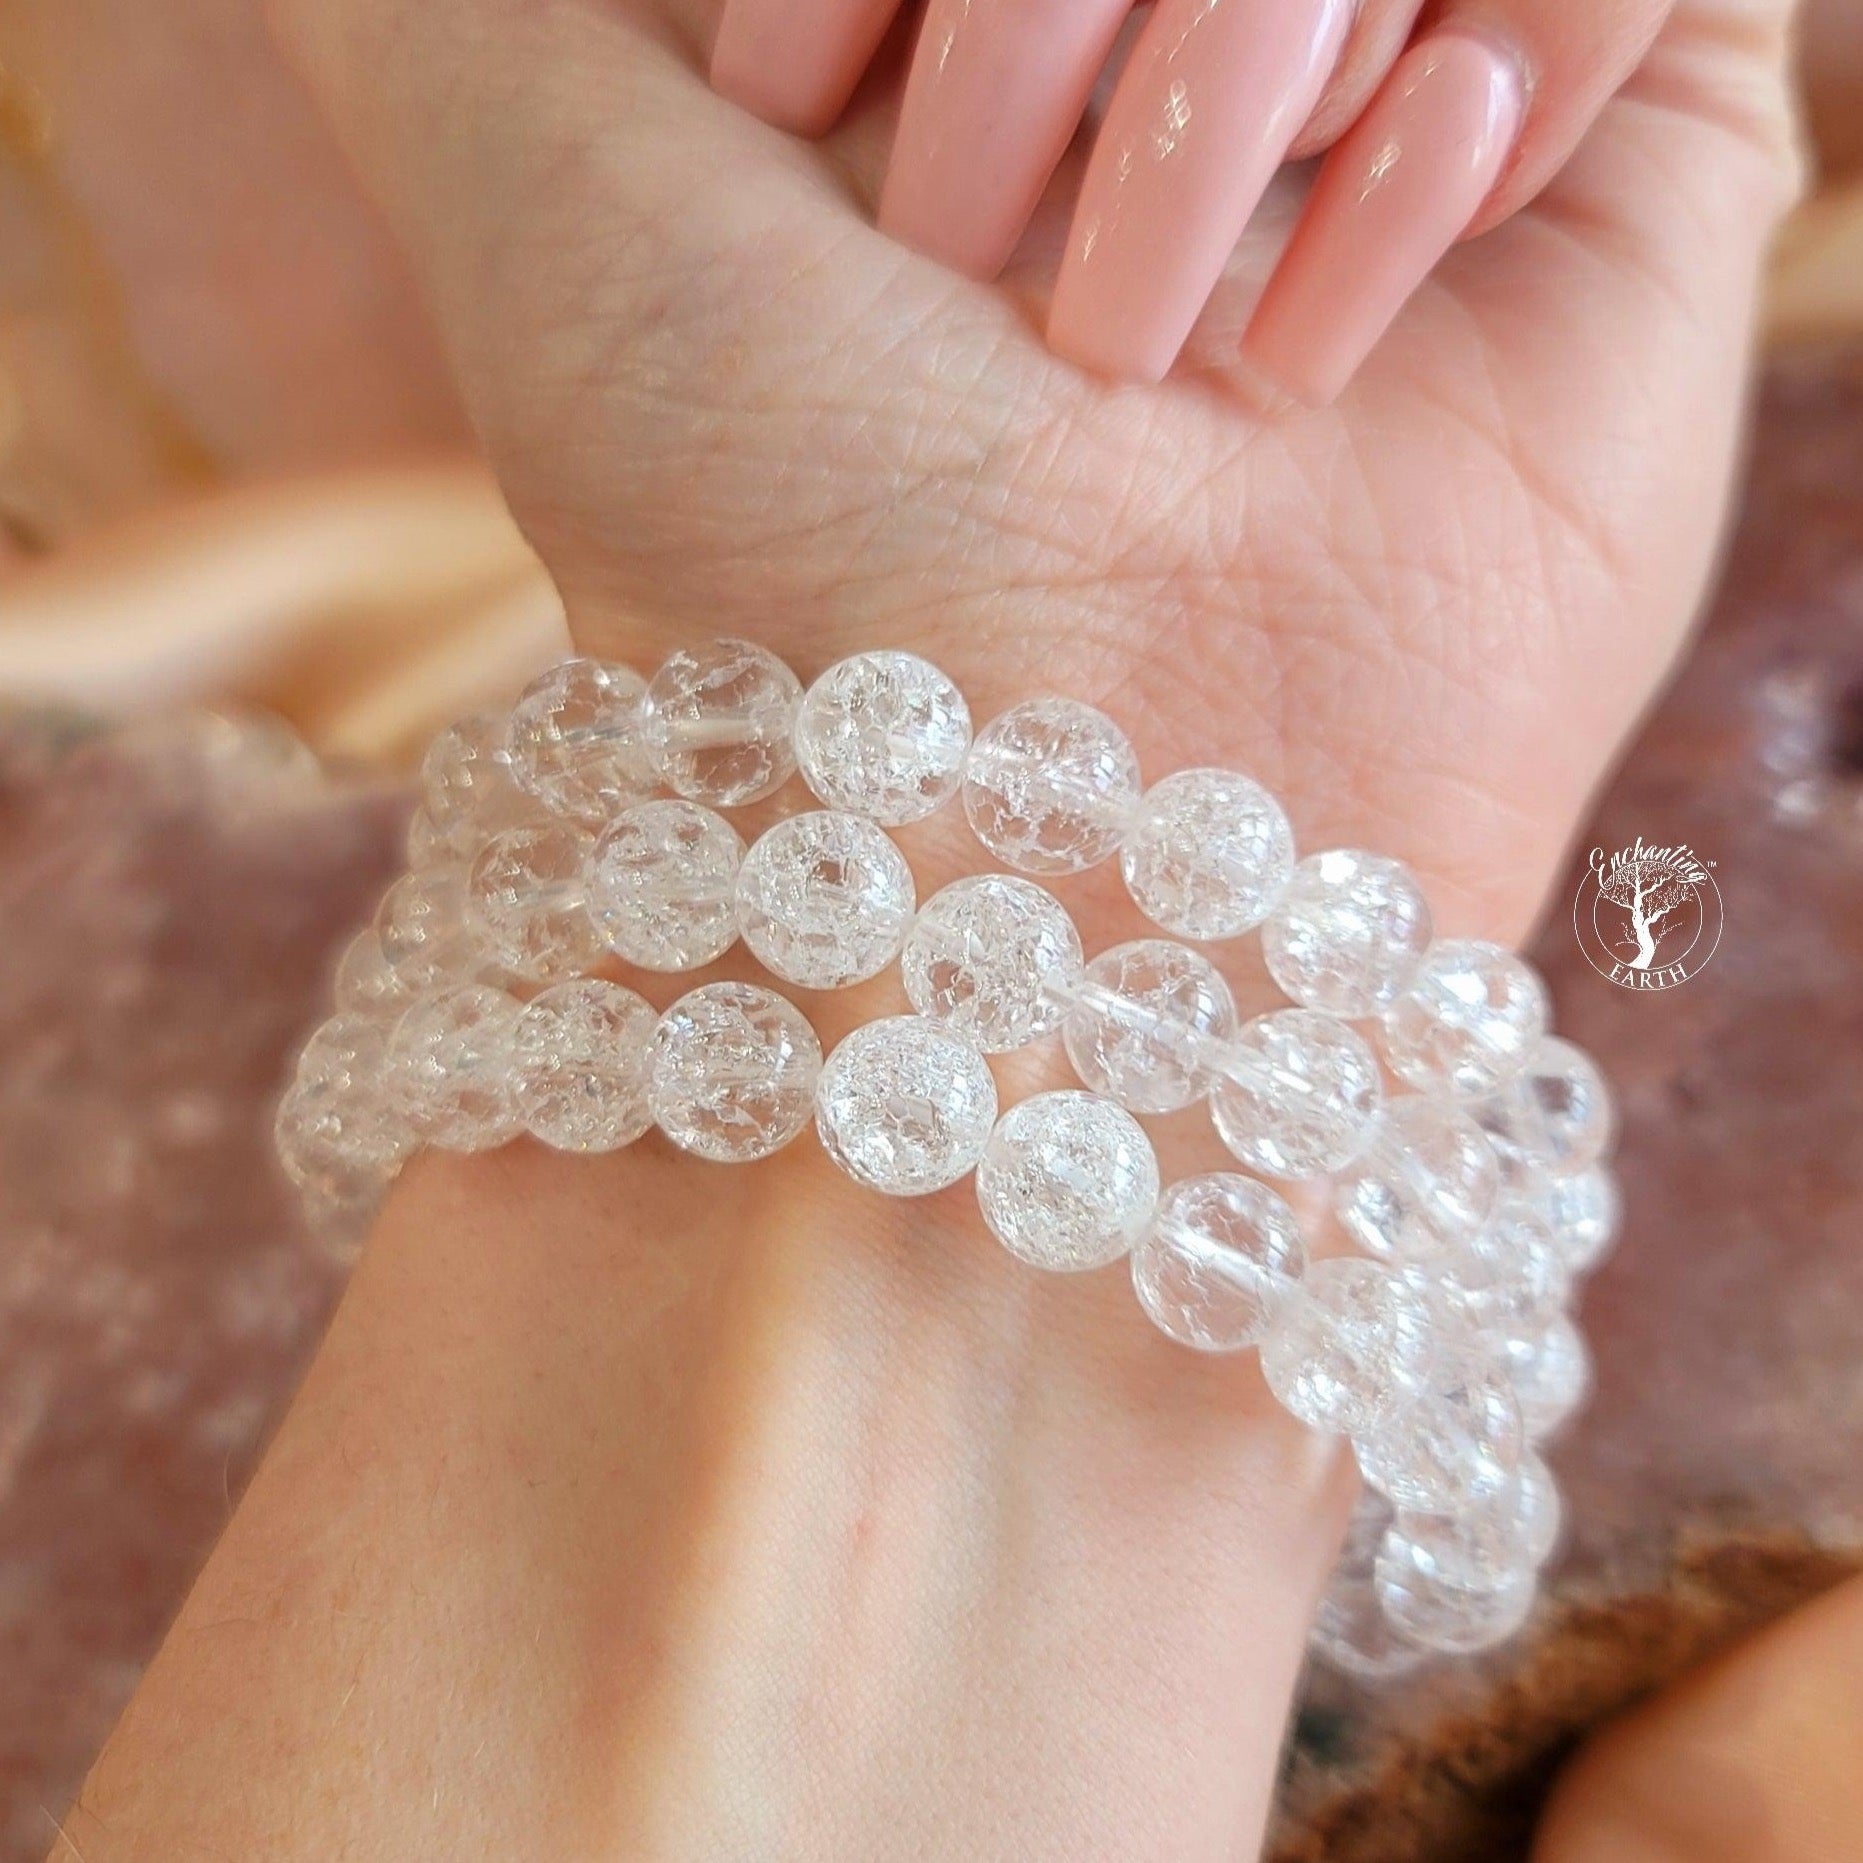 Crackle Quartz (Fire & Ice) Bracelet for Connection with your Higher Self